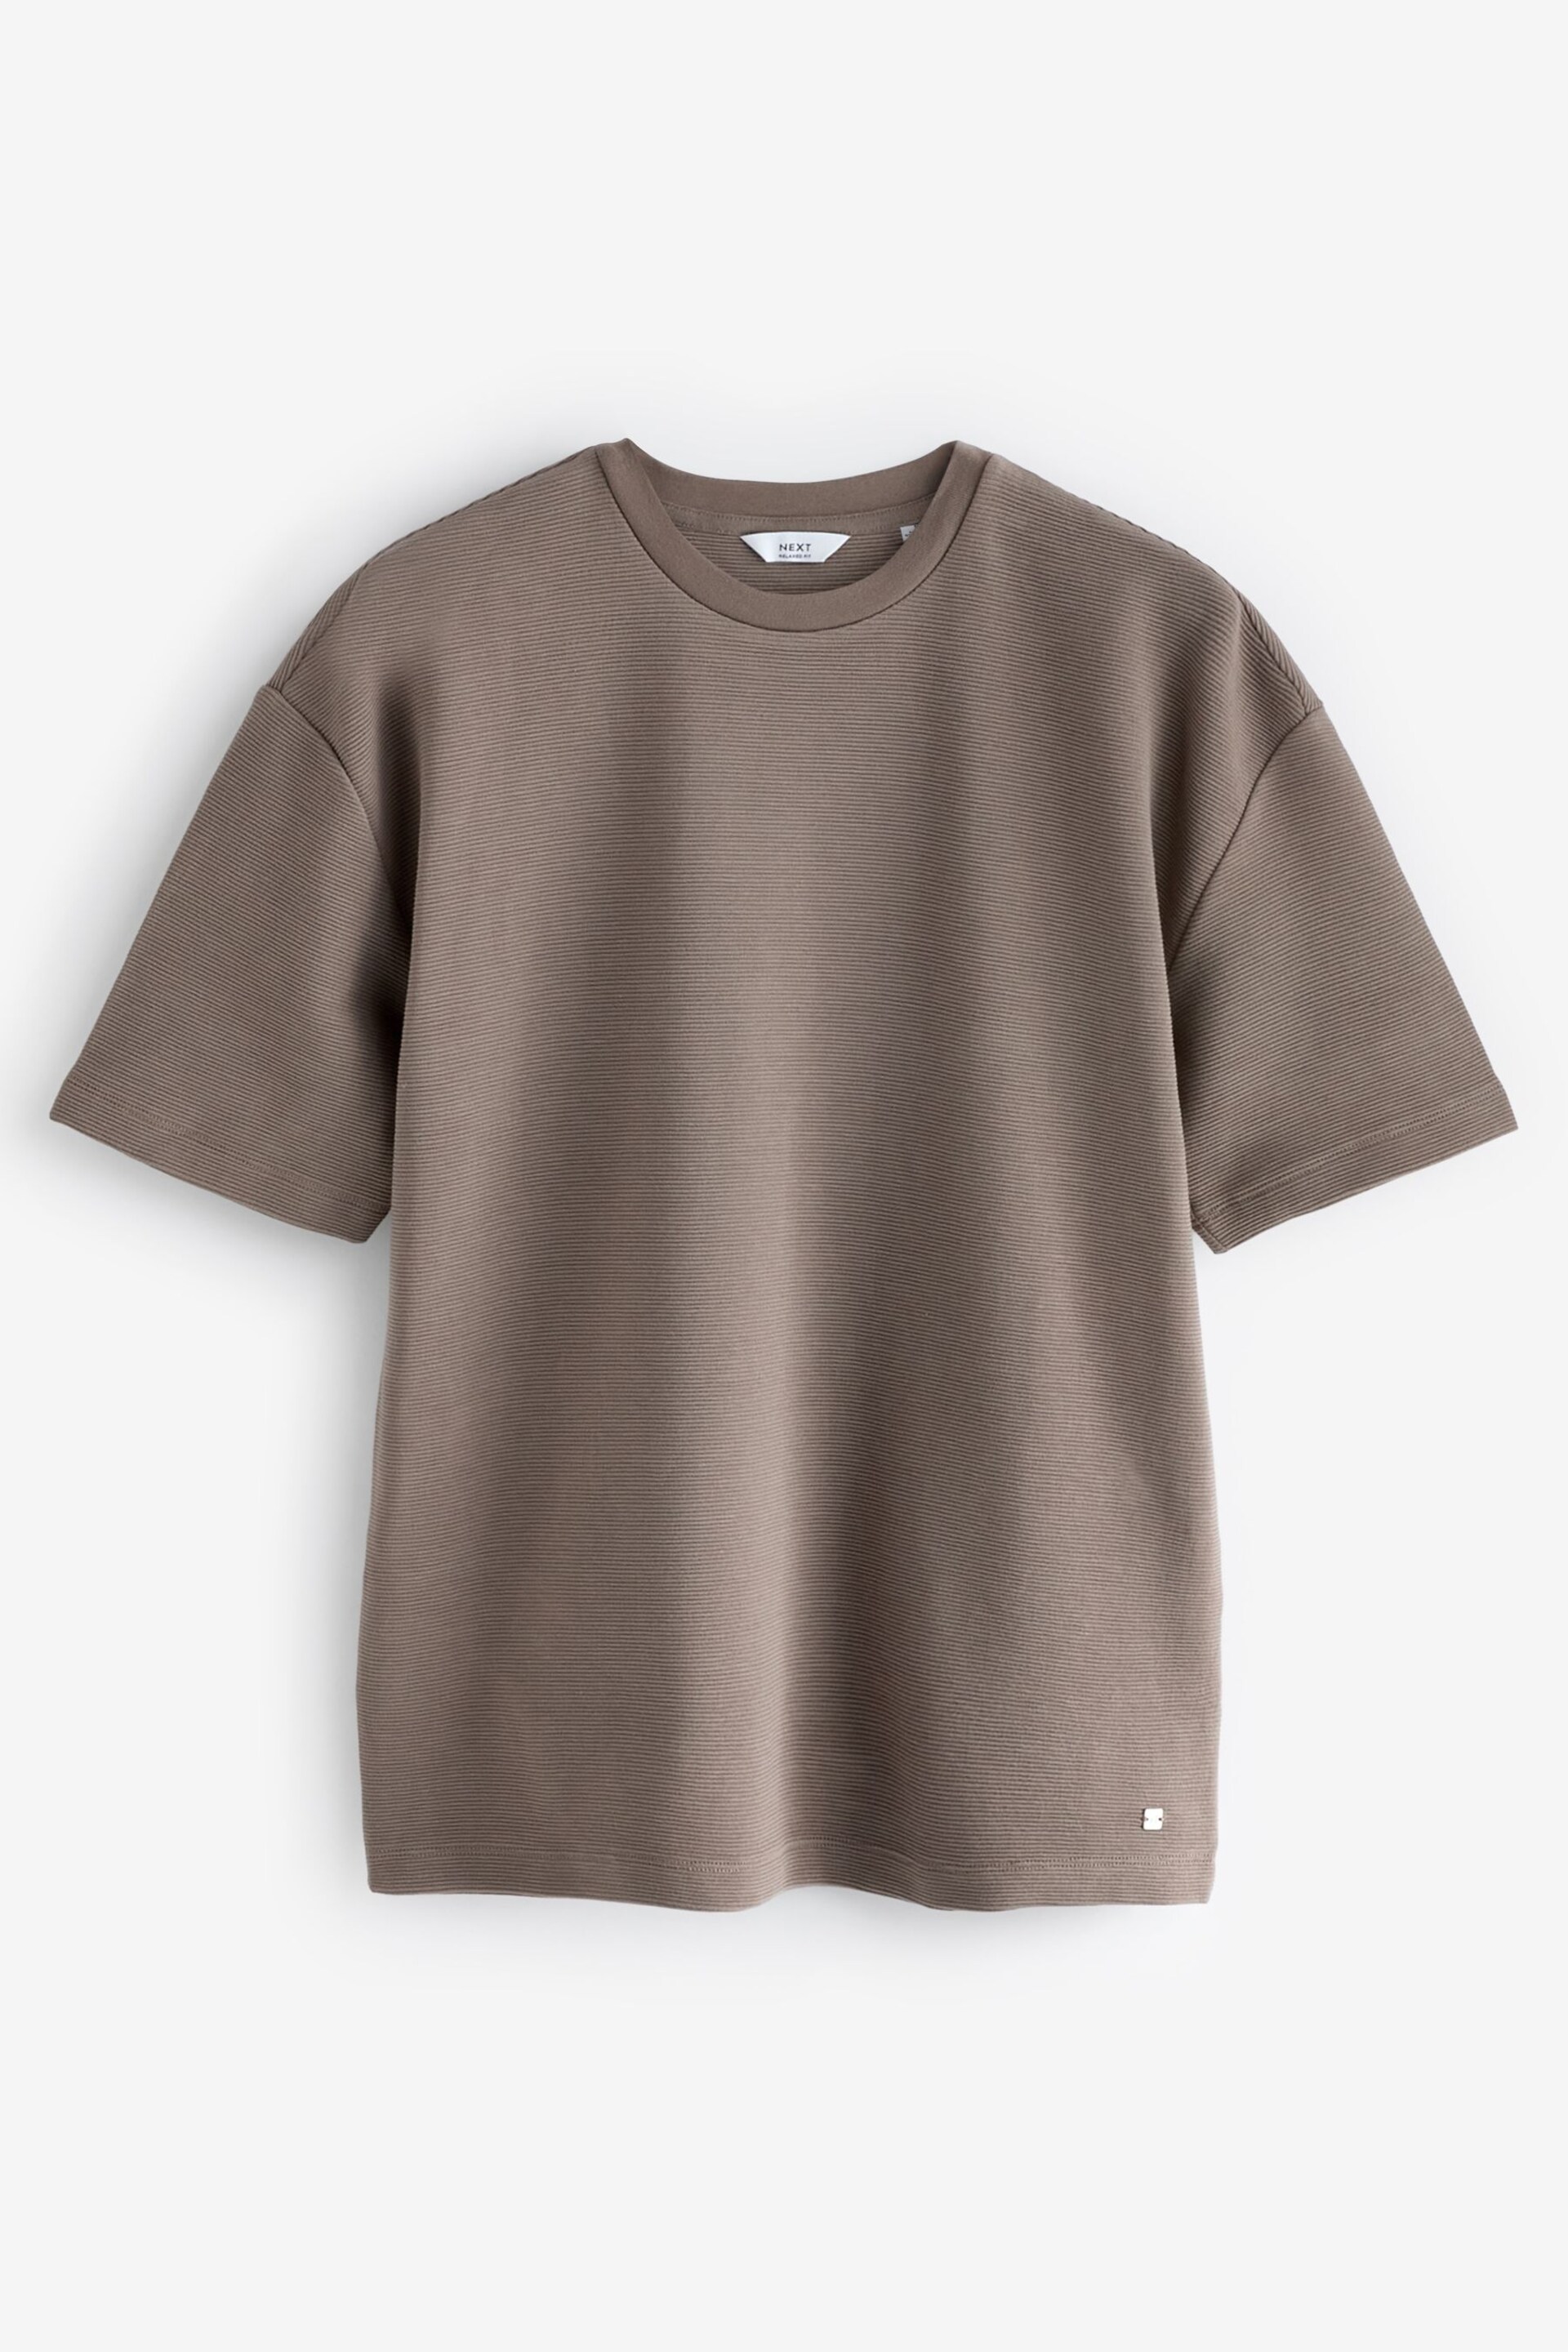 Brown Relaxed Fit Graphic Heavyweight T-Shirt - Image 4 of 6